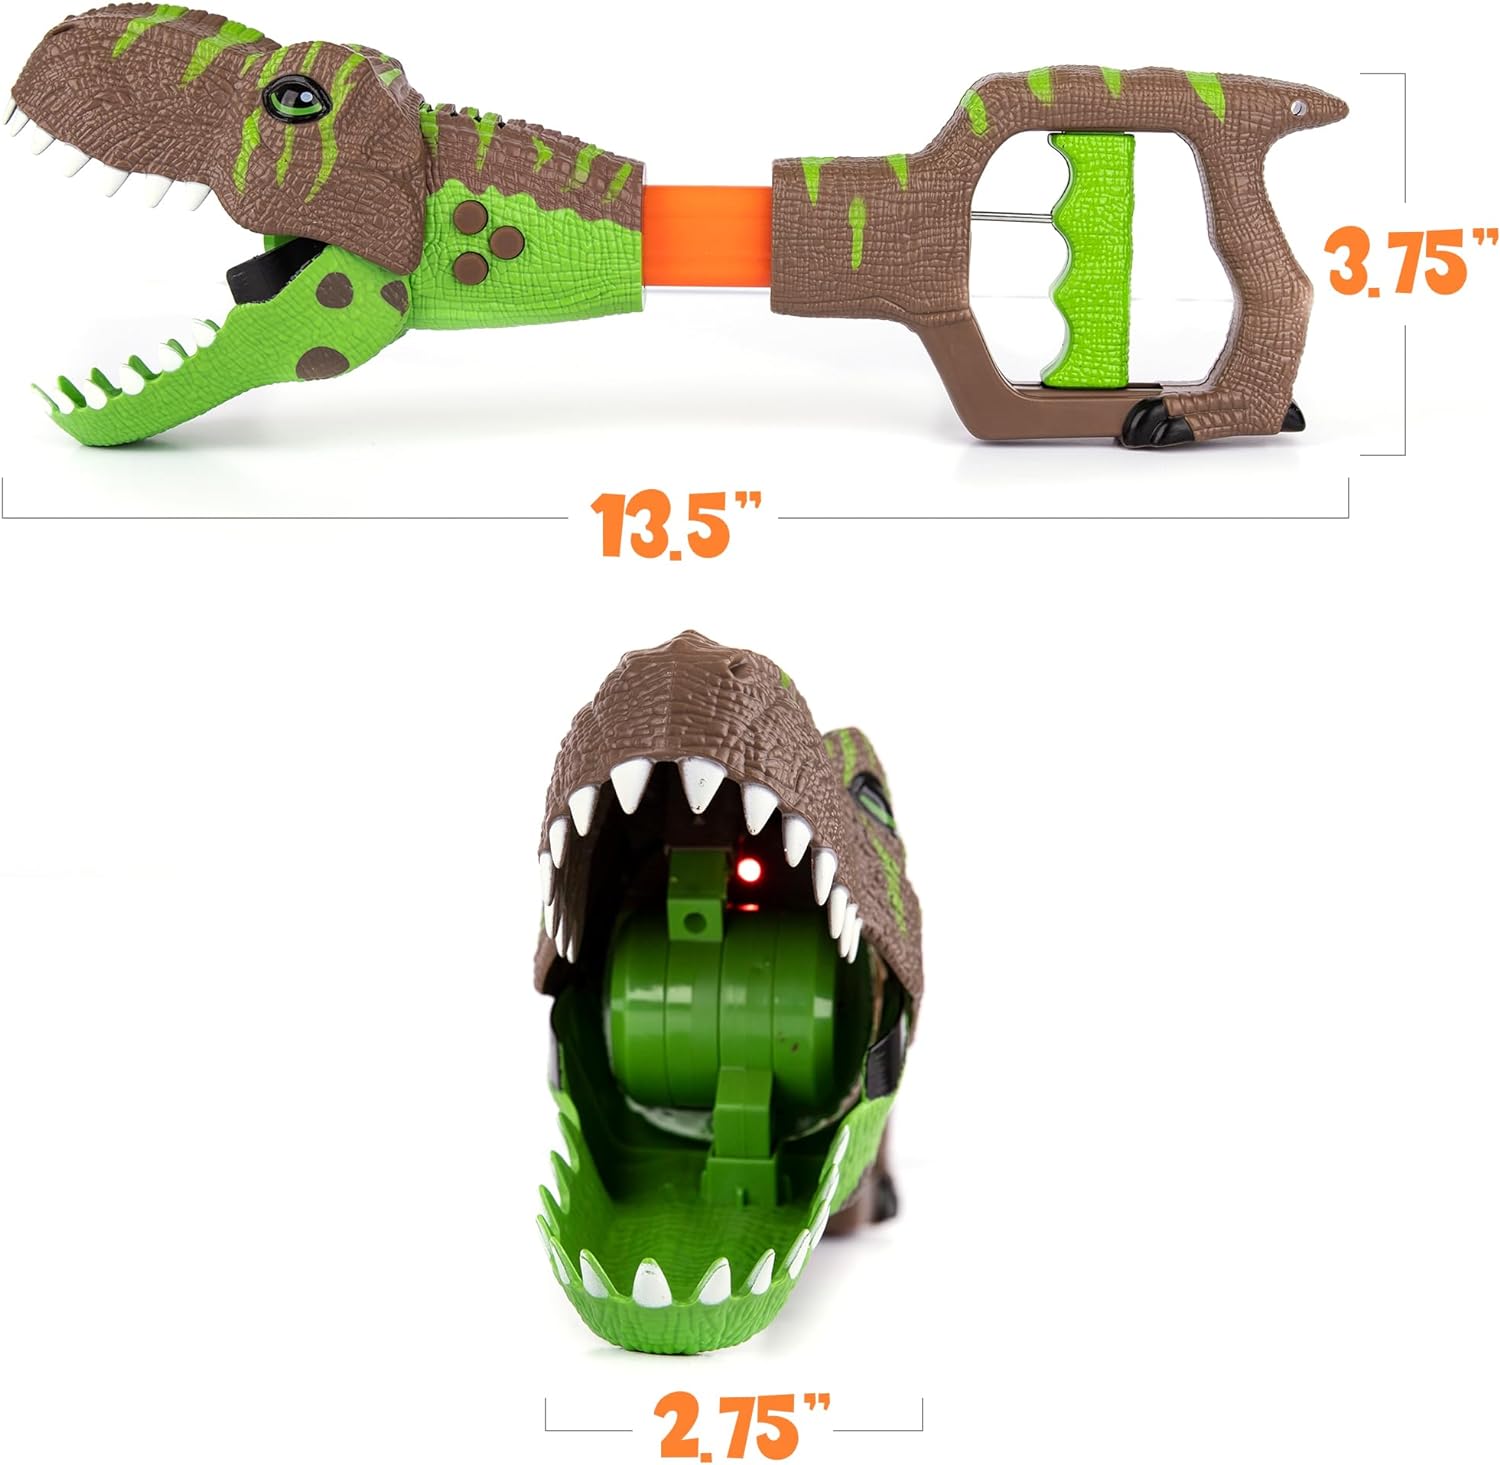 ArtCreativity Dino Grabber Toy for Kids with Lights & Sounds, Dinosaur Chomper with 3 Roaring Sounds and Red LED Light in Mouth, Cool Dinosaur Toys for Kids, Dinosaur Snapper, Batteries Included